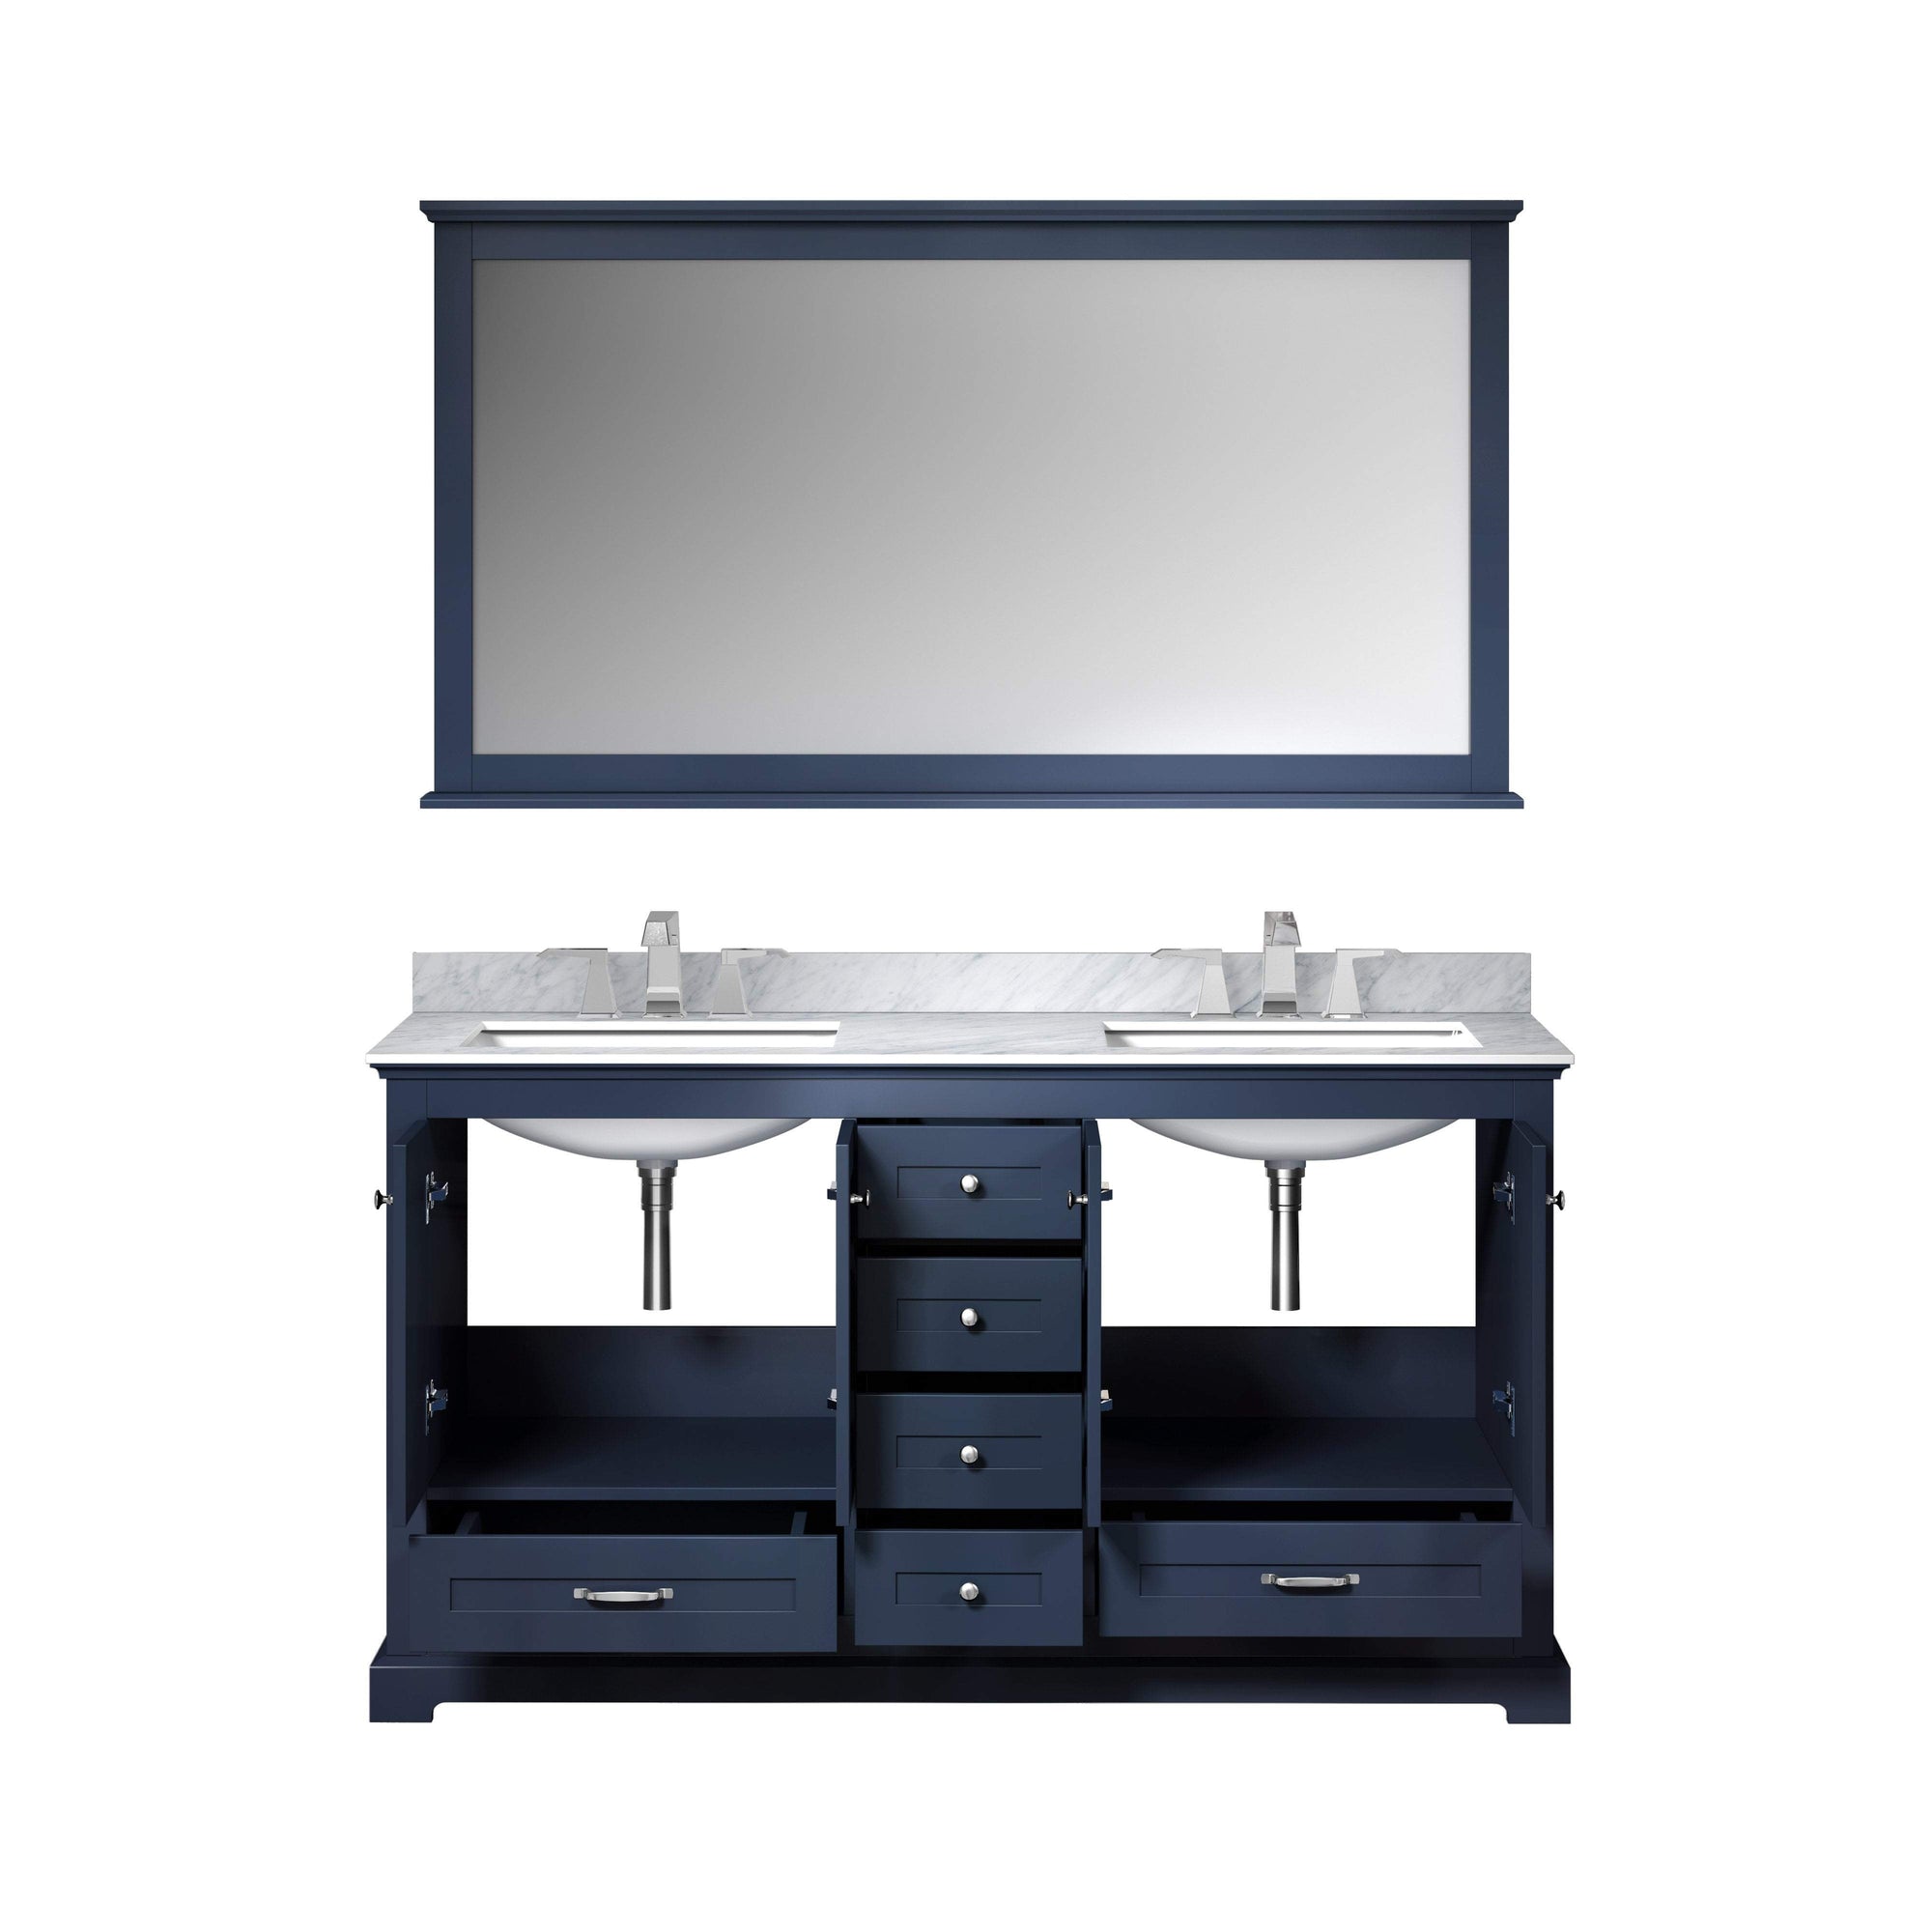 60" Navy Blue Double Vanity, White Carrara Marble Top, White Square Sinks and 58" Mirror w/ Faucets